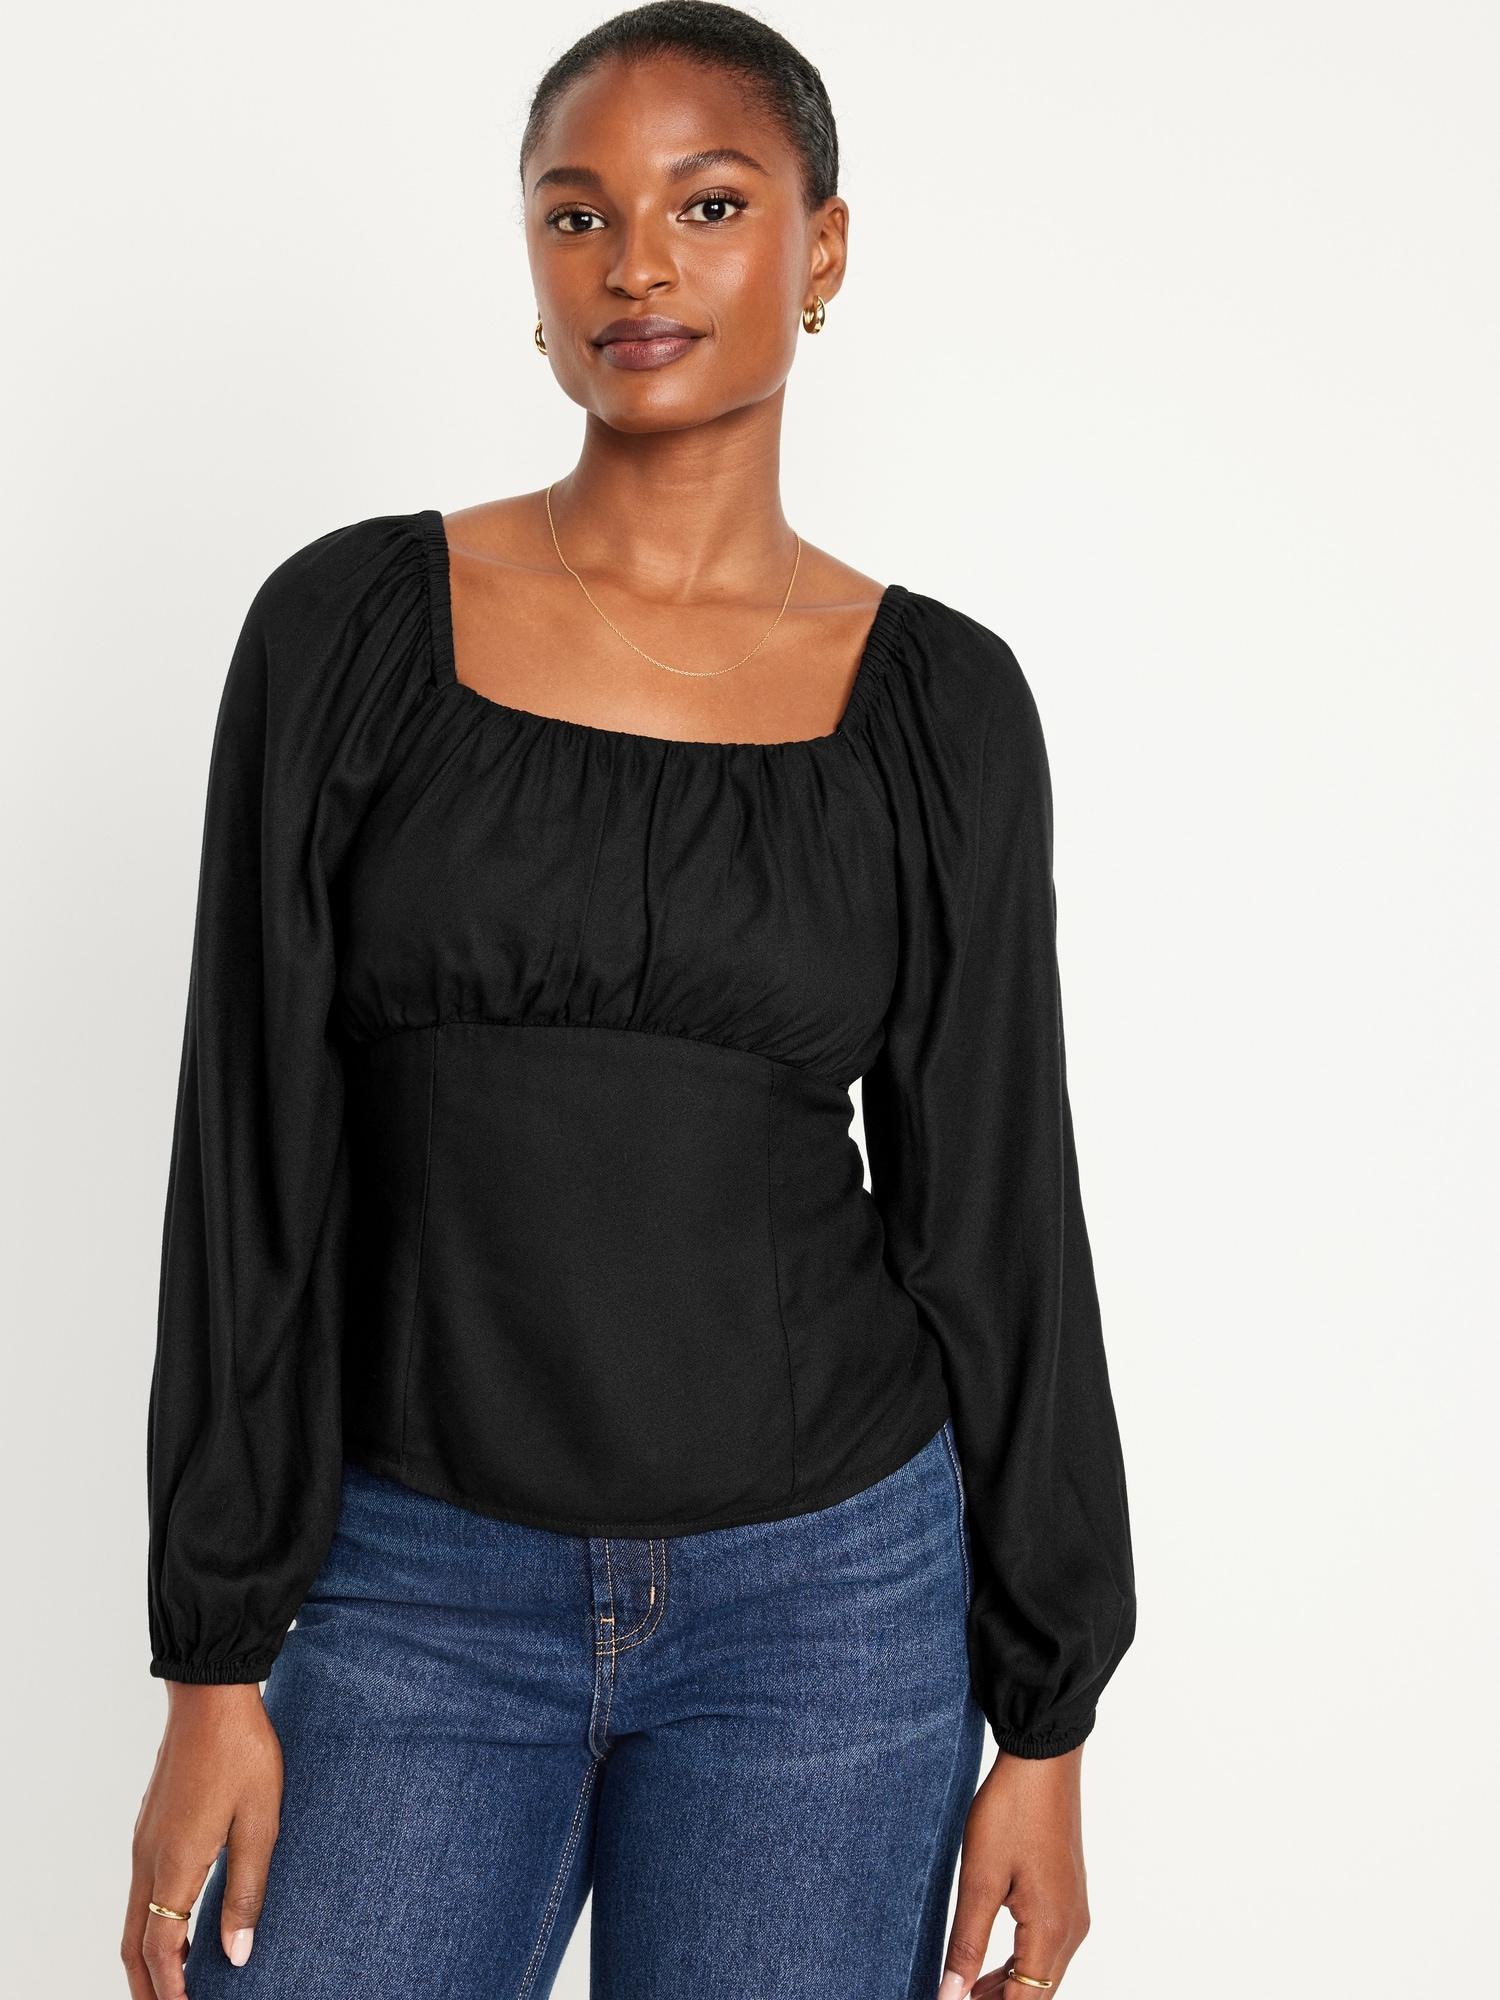 Long Sleeve Square Neck Tops